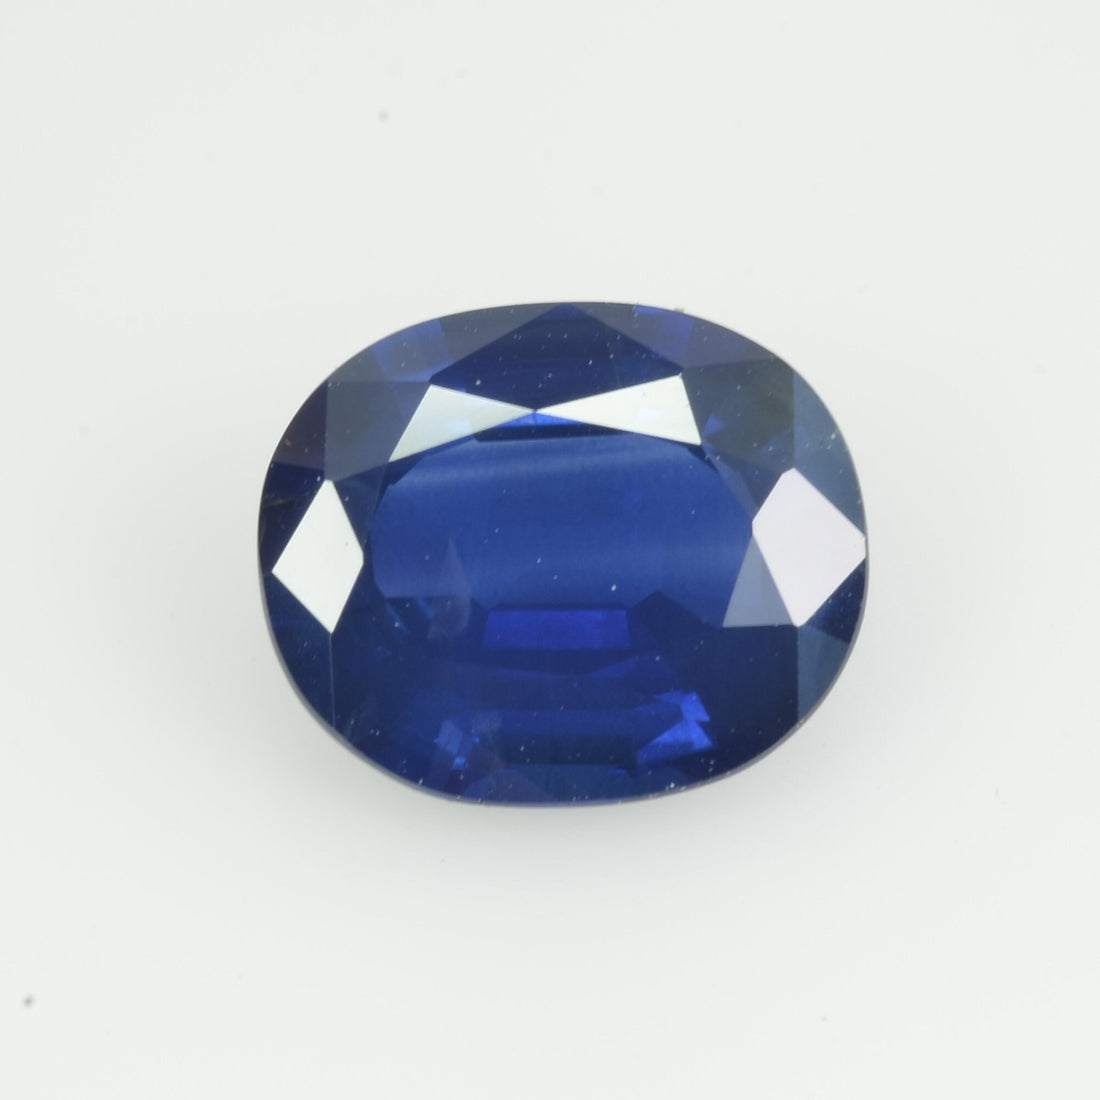 2.11 cts Natural Blue Sapphire Loose Gemstone Oval Cut